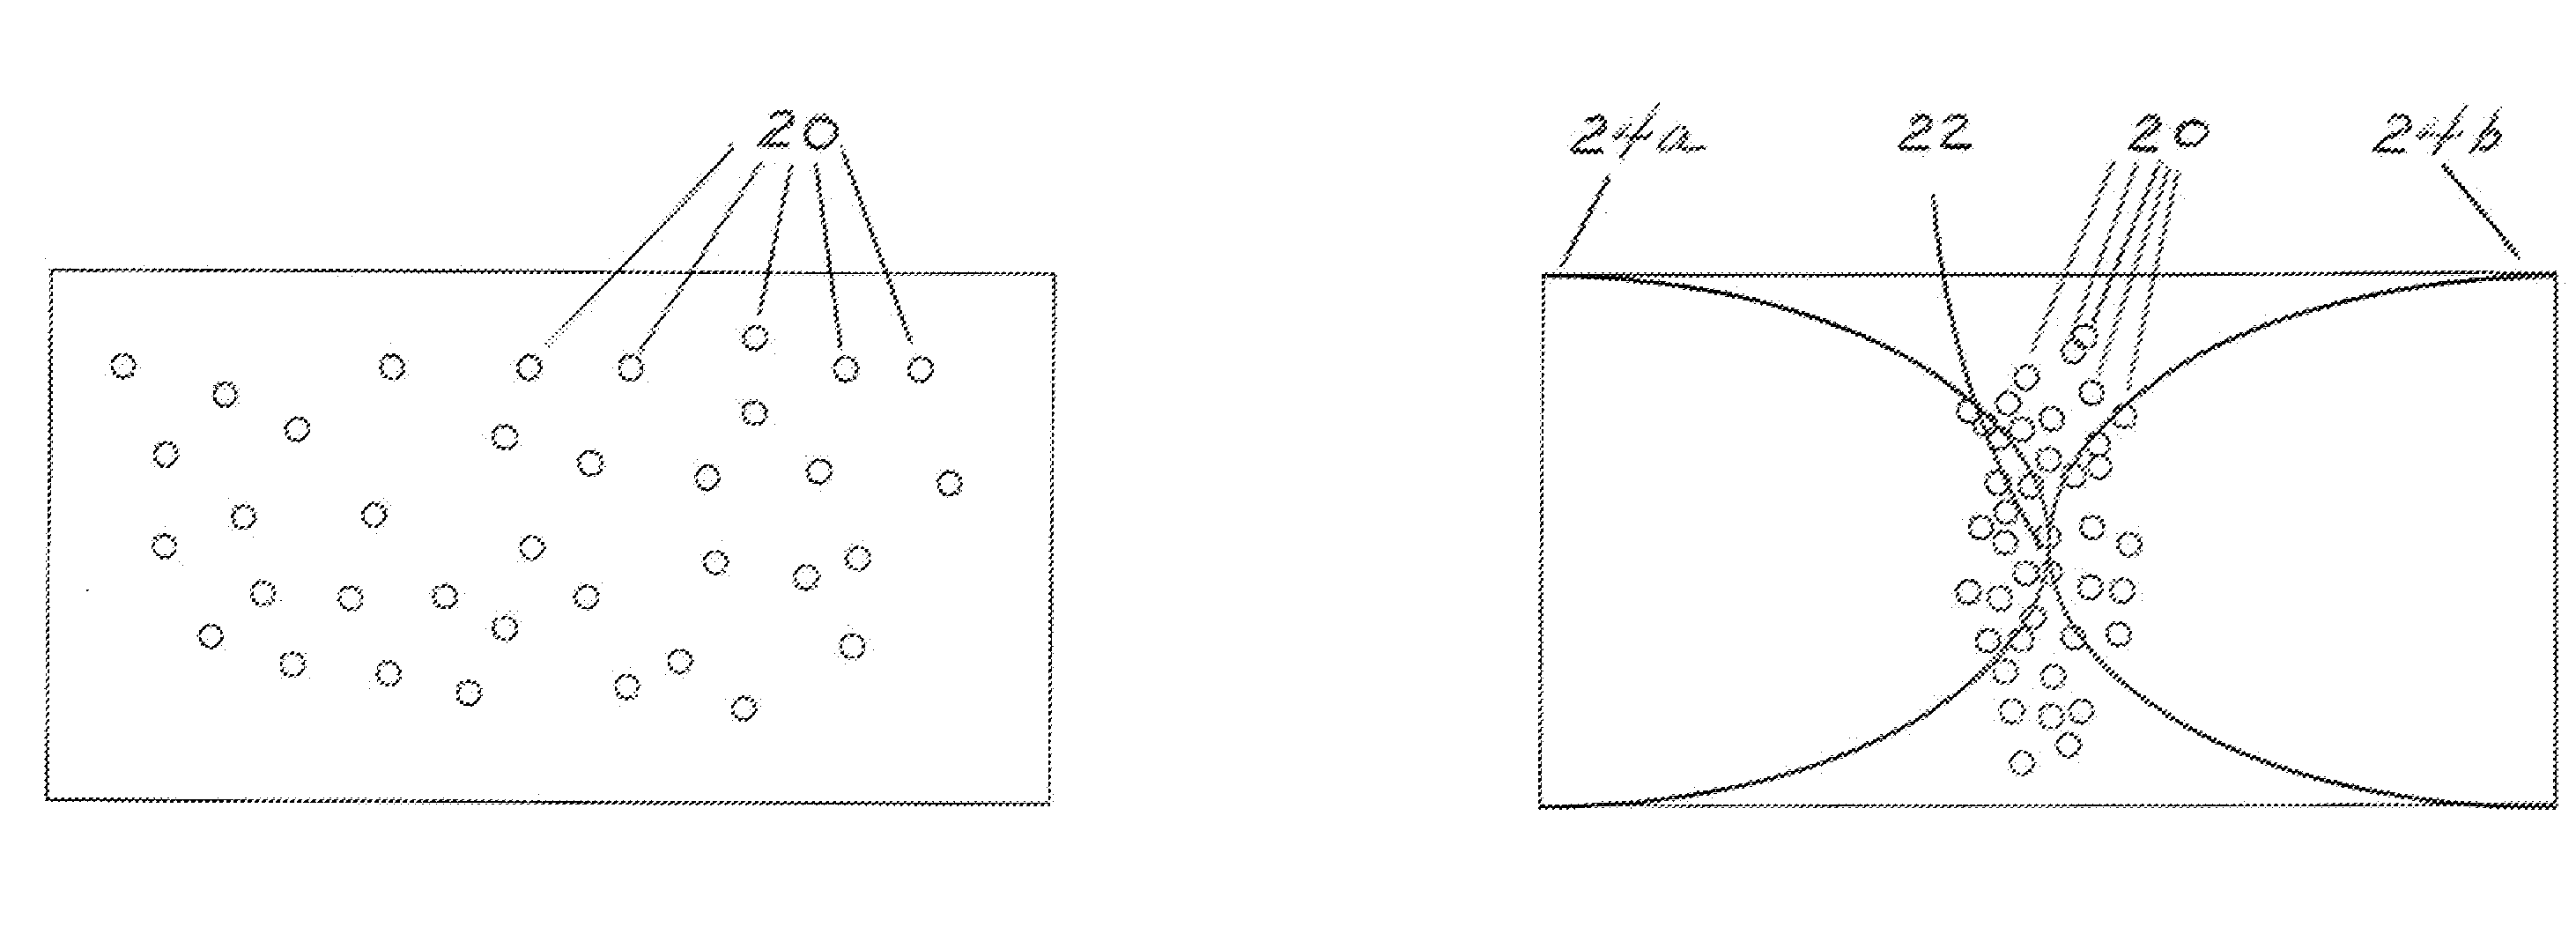 Apparatus and method for separation of particles suspended in a liquid from the liquid in which they are suspended